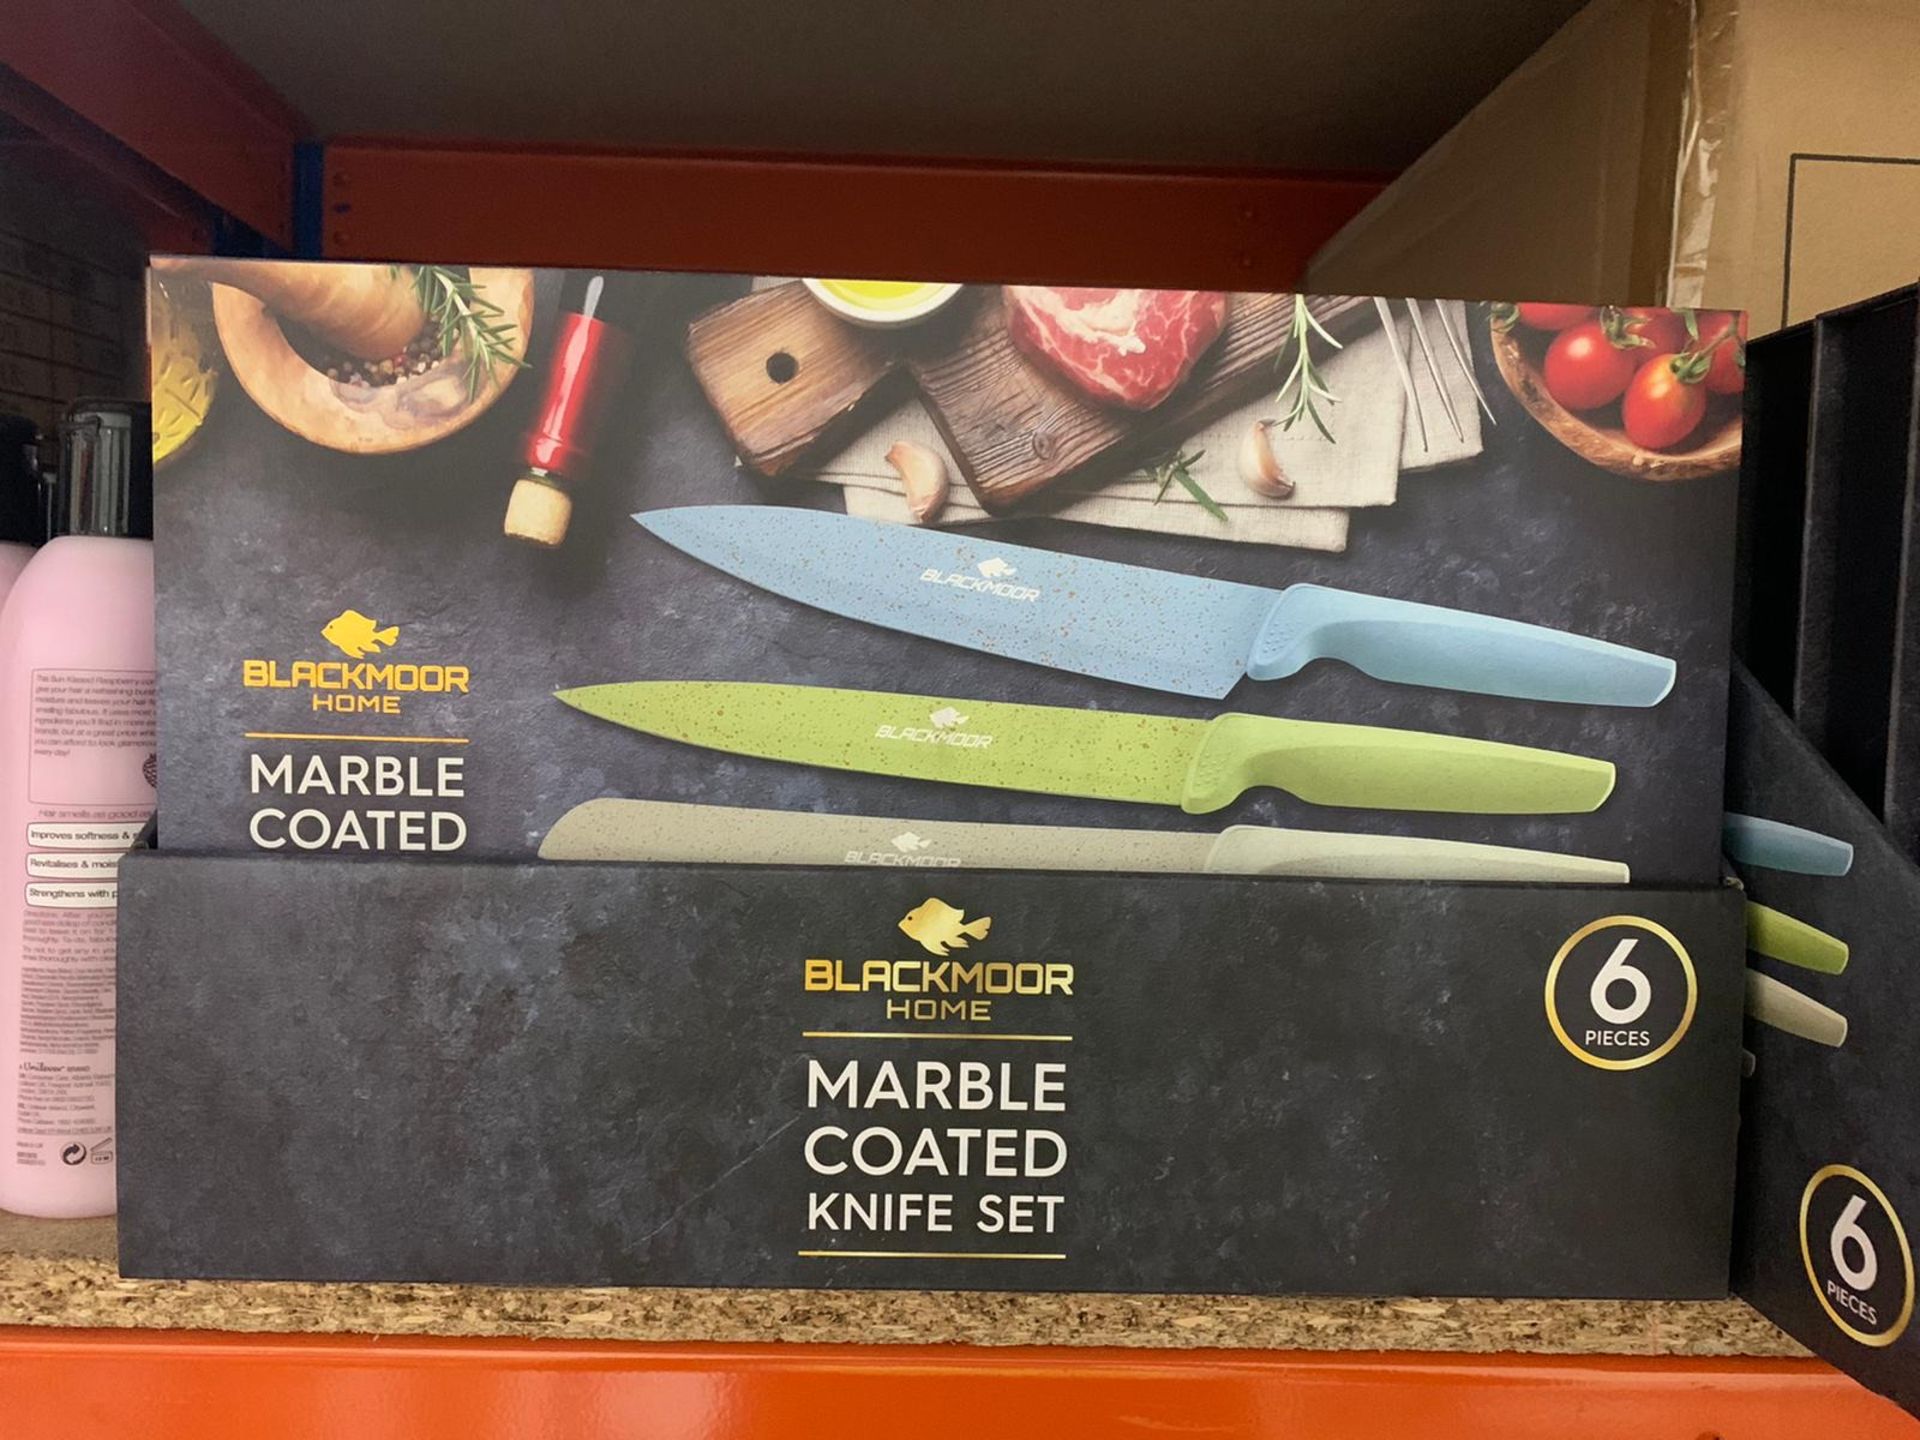 BRAND NEW BLACKMOOR HOME 6 PIECE MARBLE COATED KNIFE SET